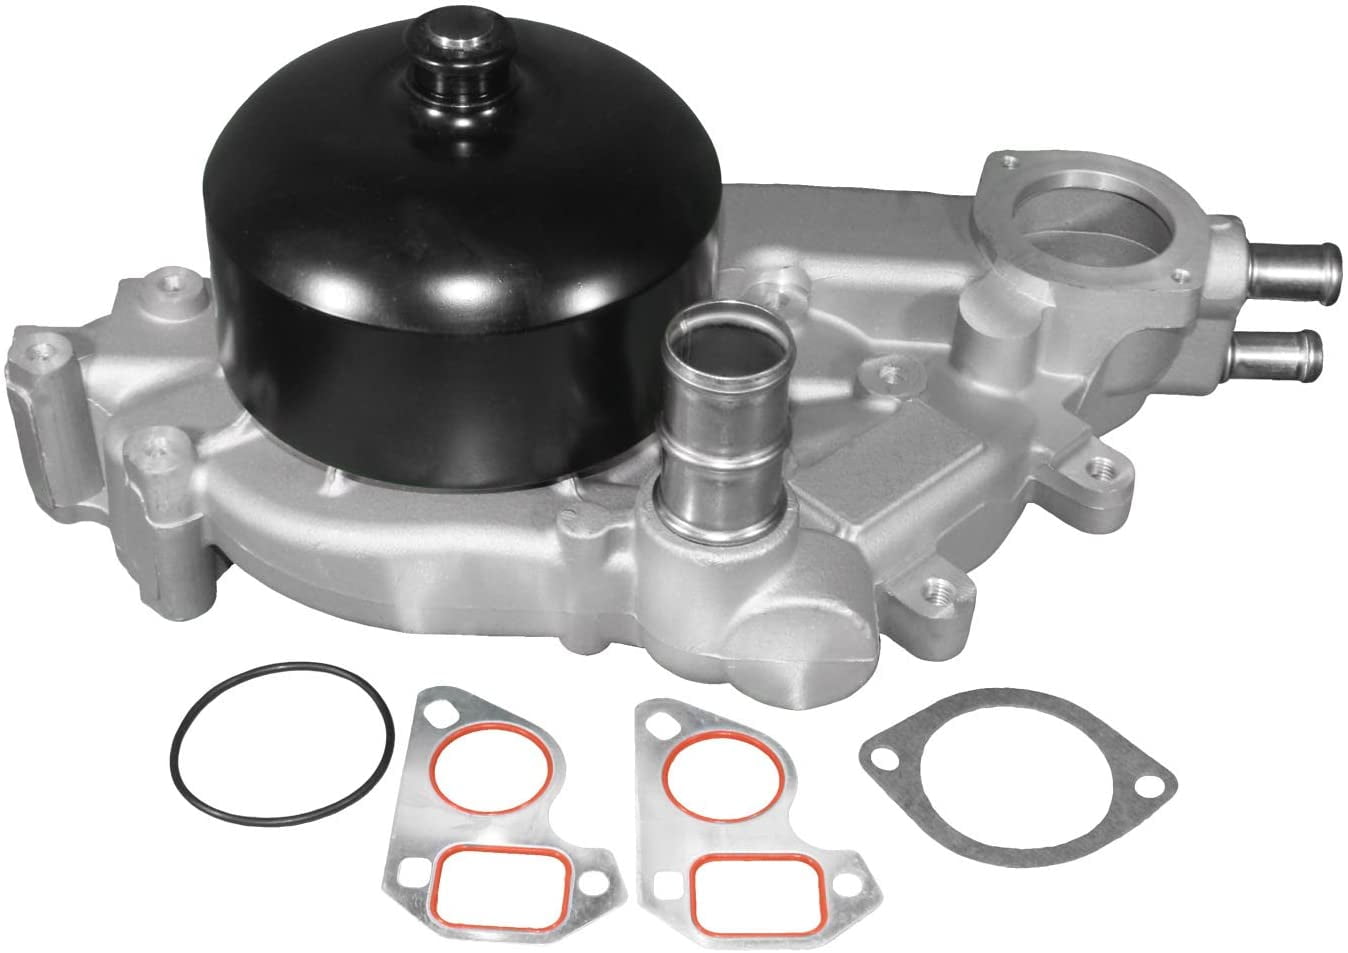 Inlet Seals ACDelco 251-713 GM Original Equipment Water Pump Kit with Thermostat Bearing Gasket Pulley Housing and Bolts Impeller 